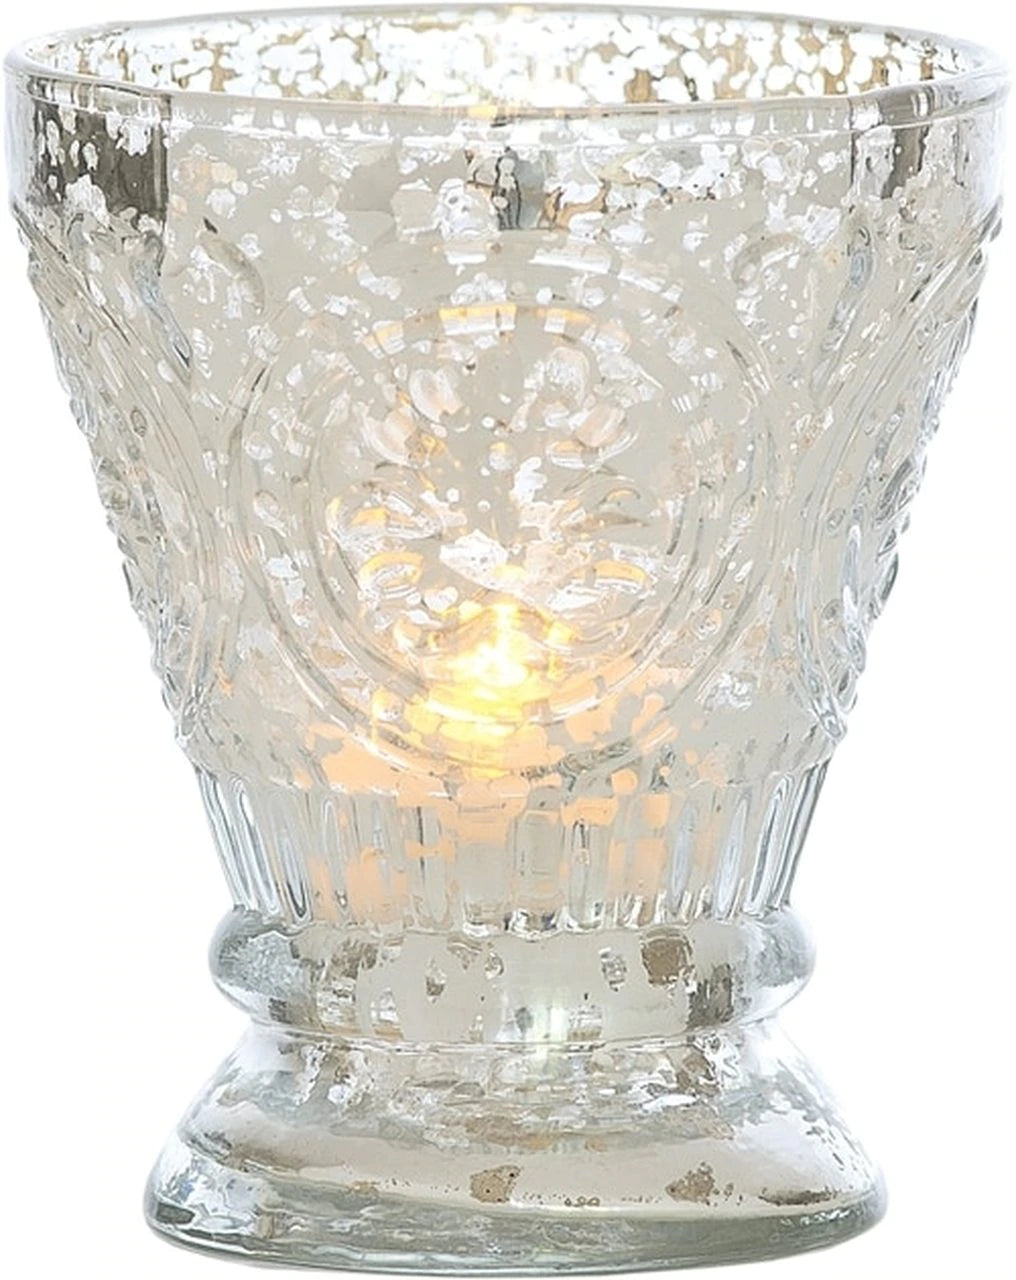 Vintage Mercury Glass Candle Holder (4-Inch, Rosemary Design, Silver) - For Use with Tea Lights - For Home Decor, Parties, and Wedding Decorations - PaperLanternStore.com - Paper Lanterns, Decor, Party Lights & More